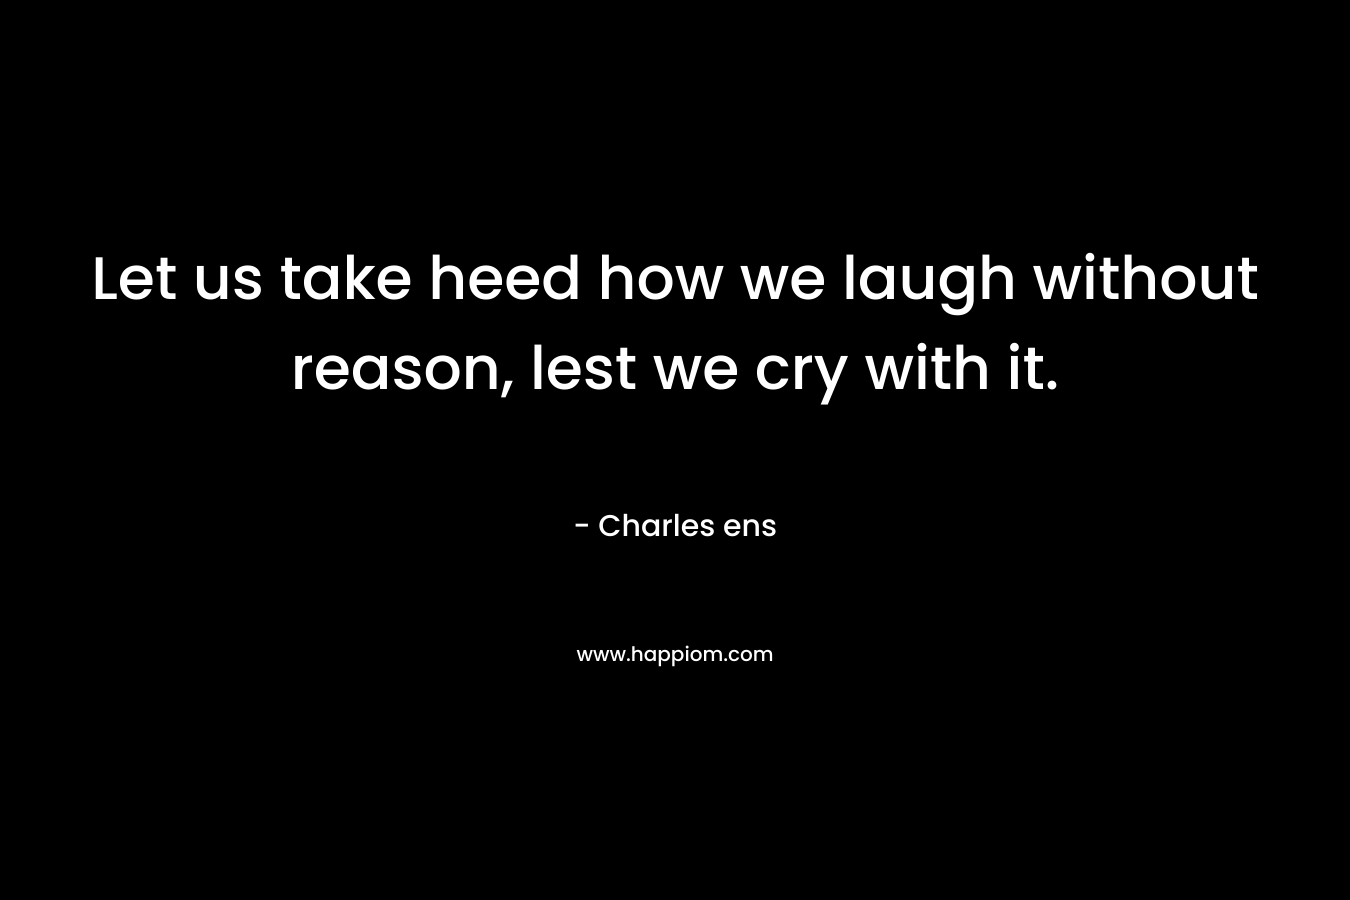 Let us take heed how we laugh without reason, lest we cry with it. – Charles ens